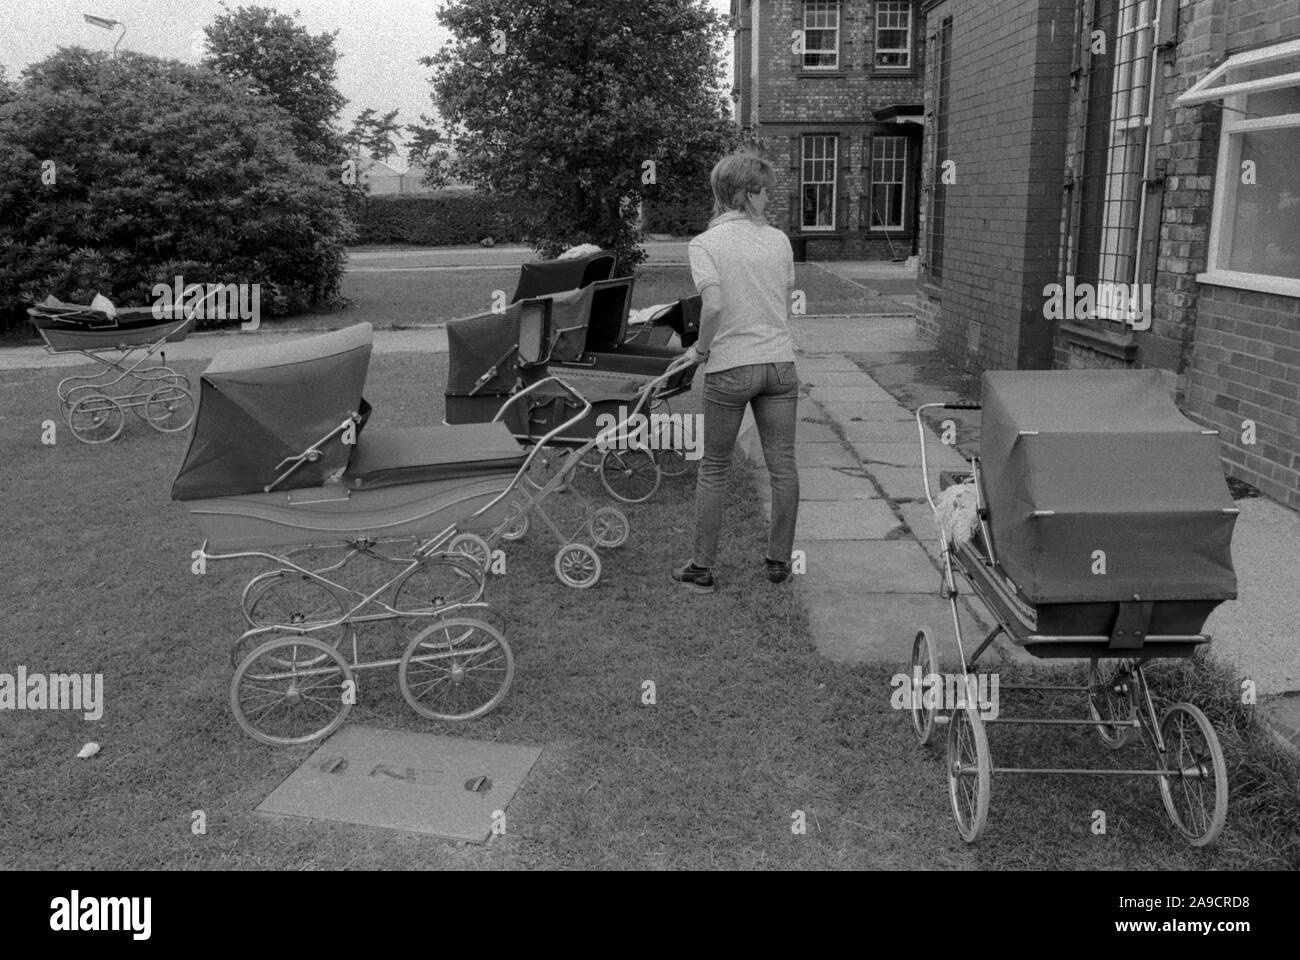 Prison UK 1986. New mother whos baby has been born in the prison, she will push the pram around the grounds. HM Prison Styal Wilmslow Cheshire 1980s. England HOMER SYKES Stock Photo